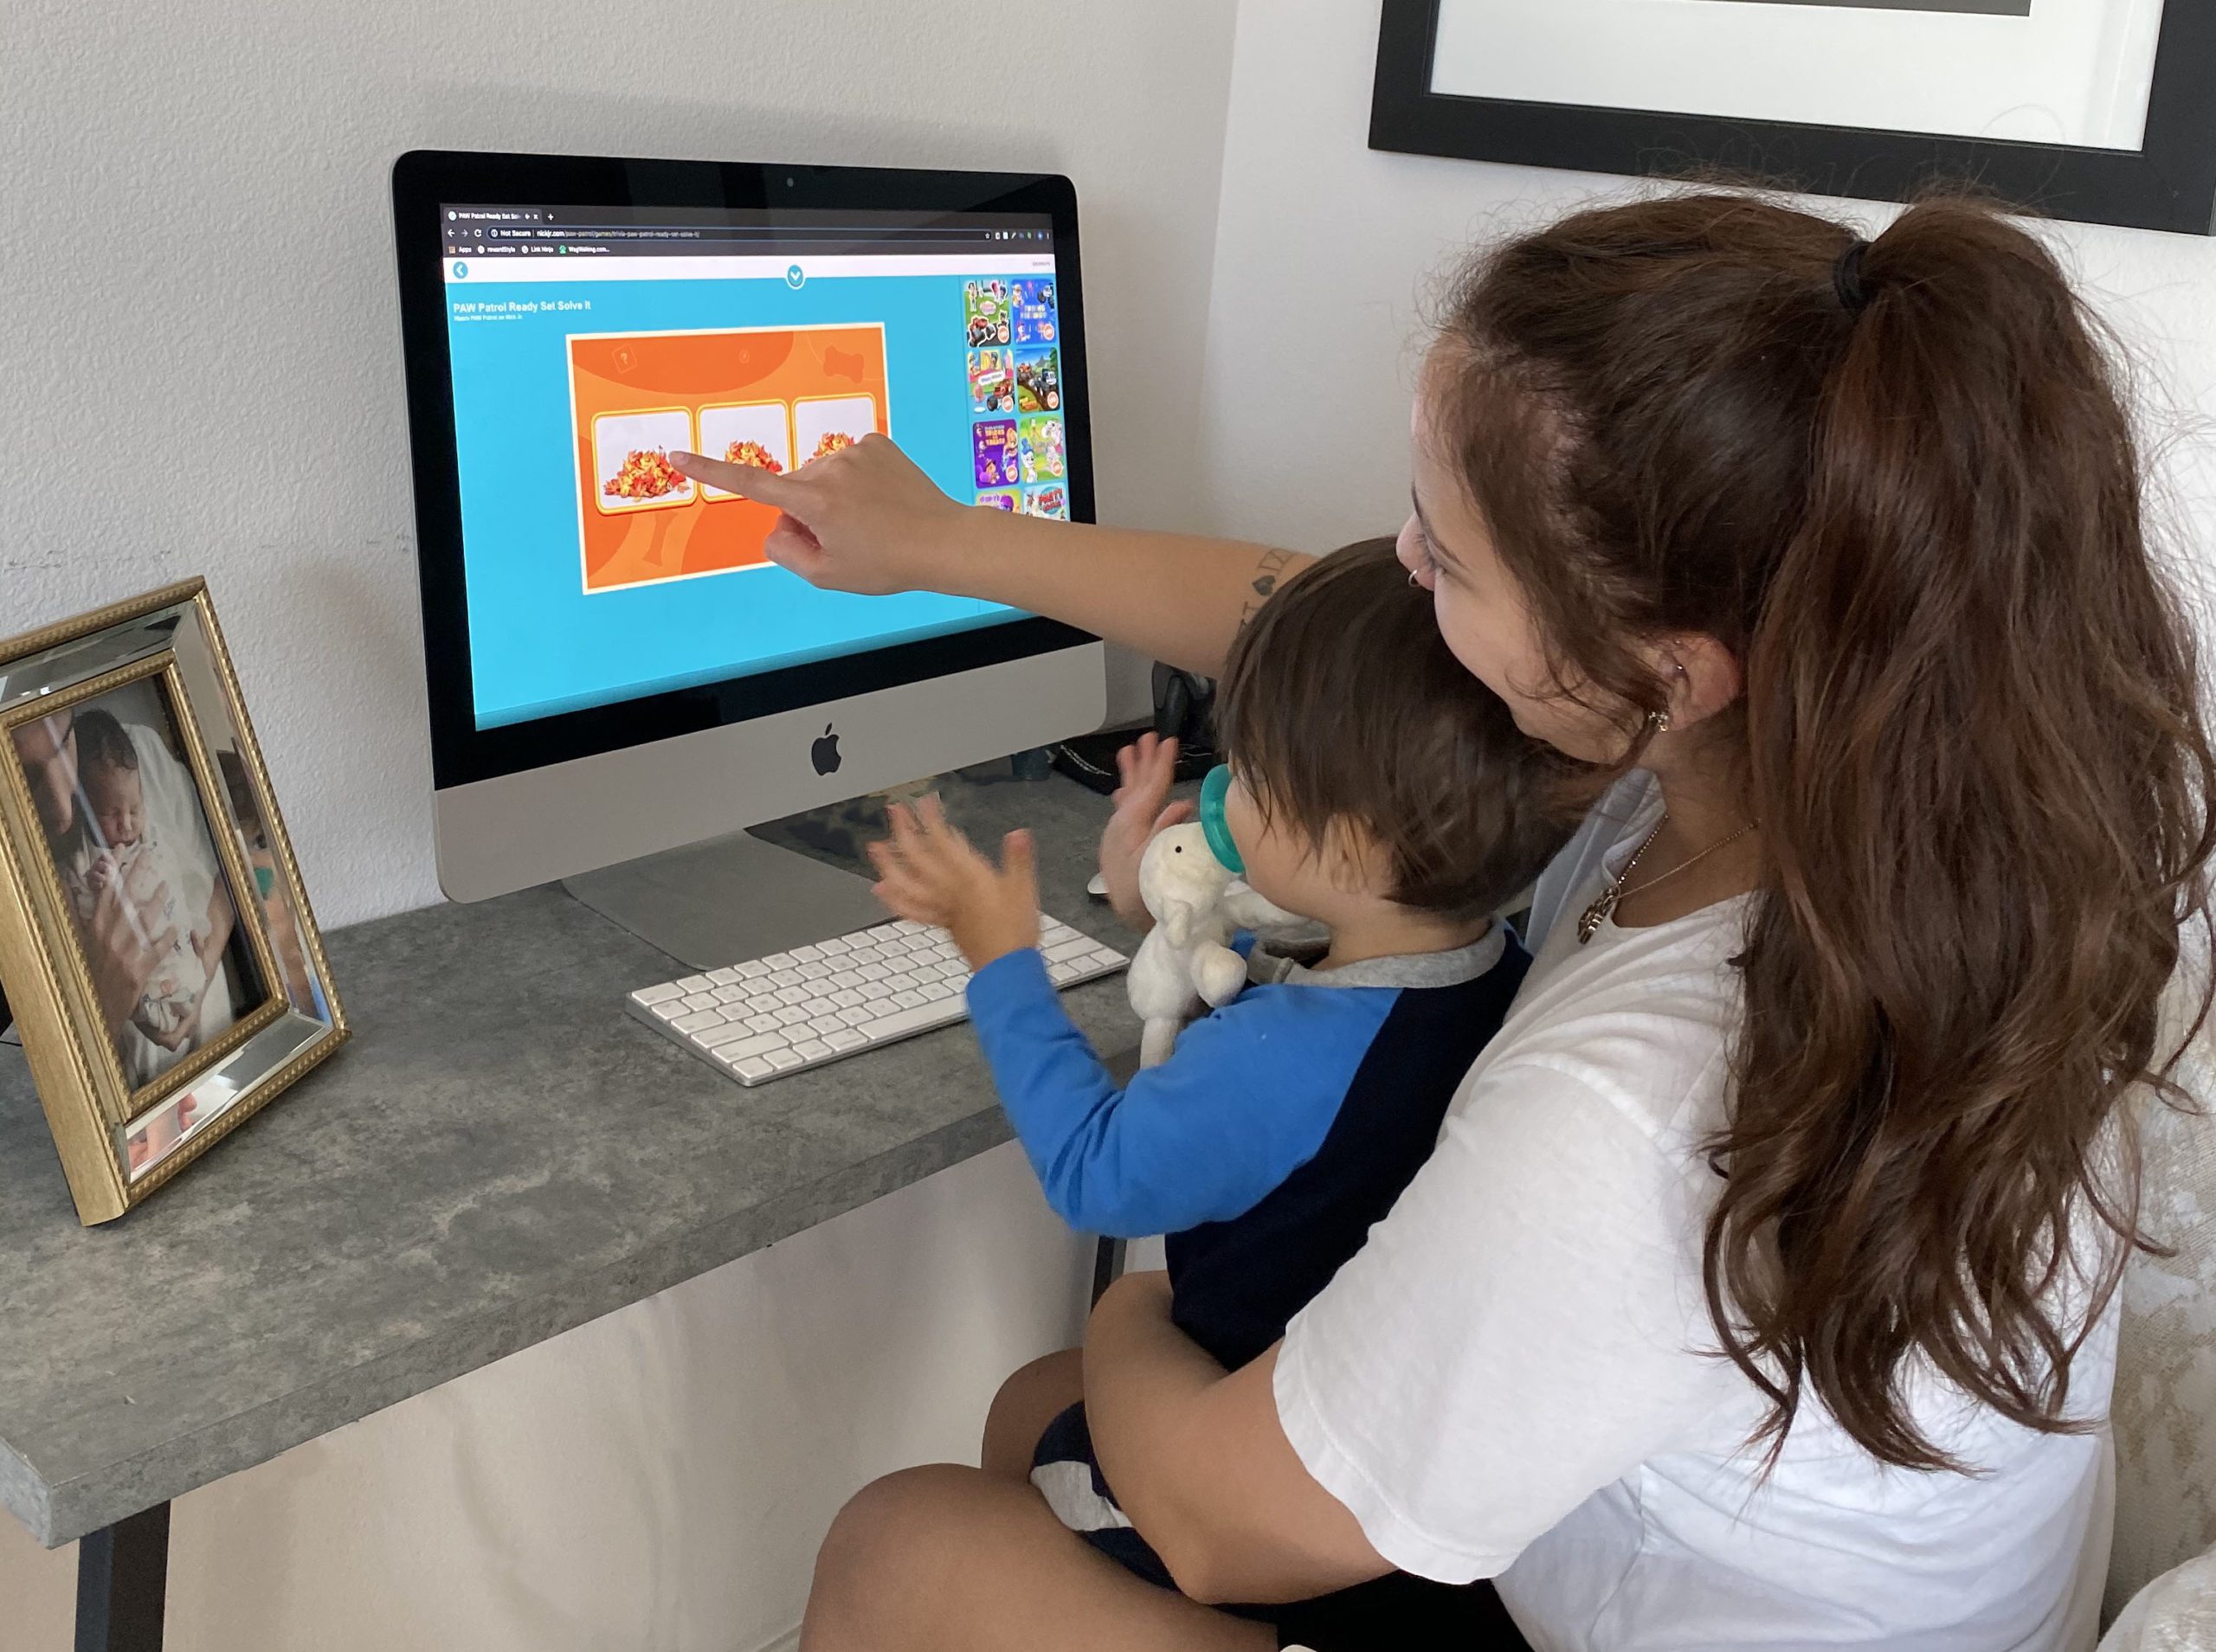 A woman and child enjoying free educational activities on a computer.